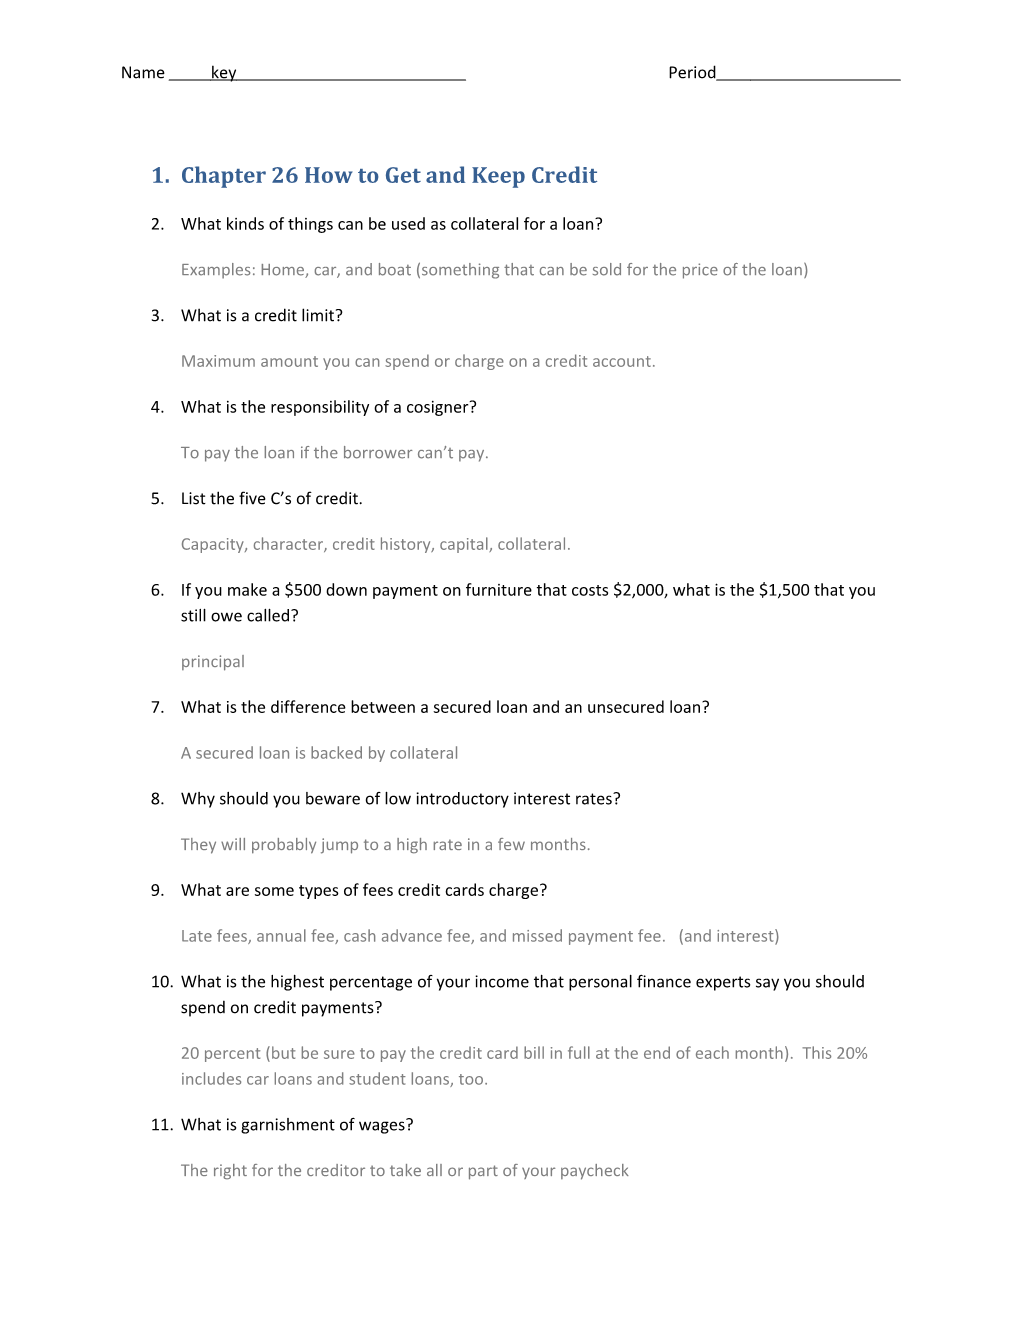 Chapter 26 How to Get and Keep Credit